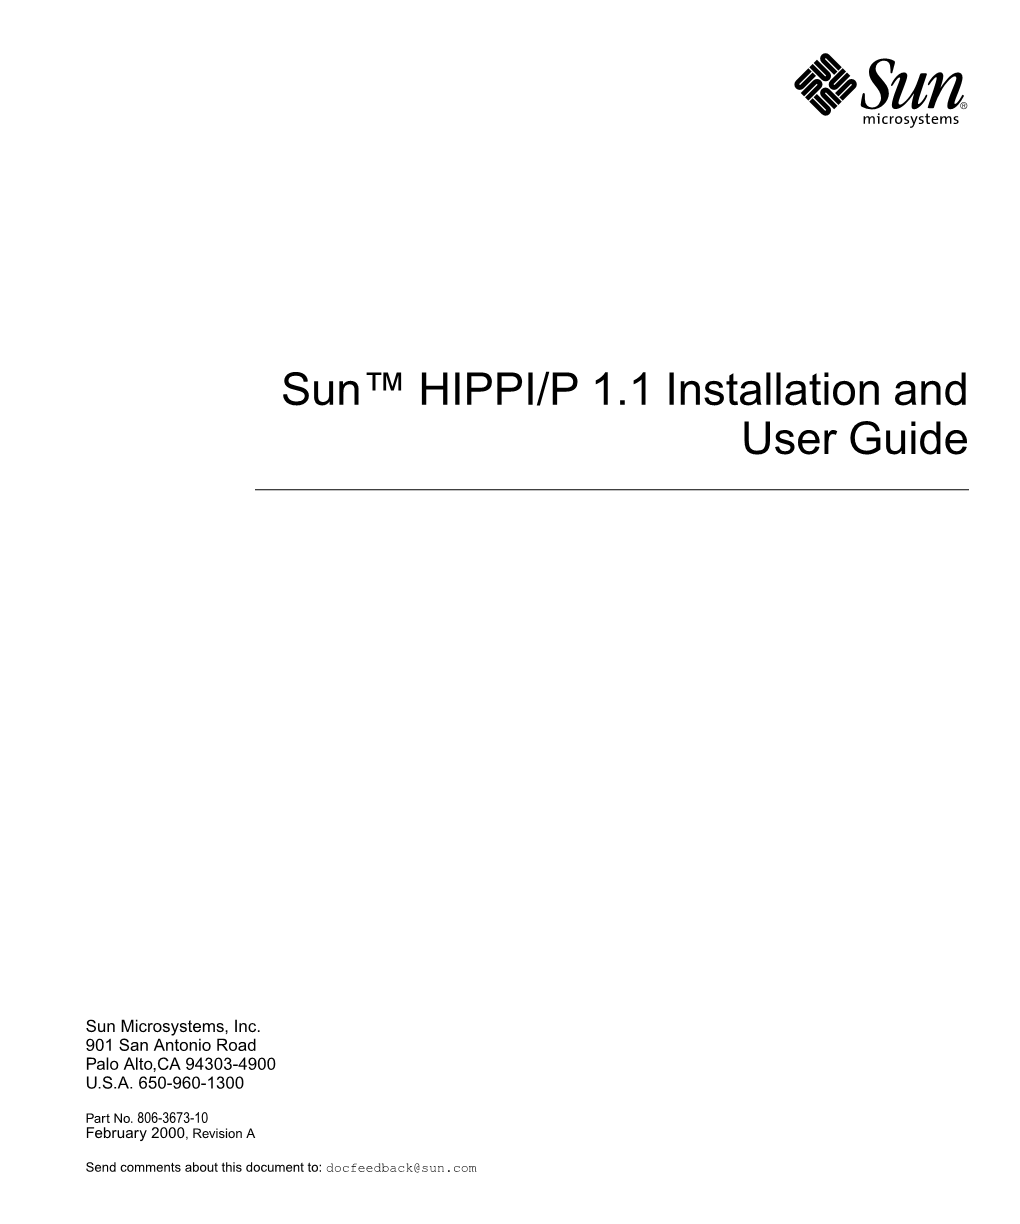 Sun HIPPI/P 1.1 Installation and User Guide • February 2000 Tuning the Socket Options 25